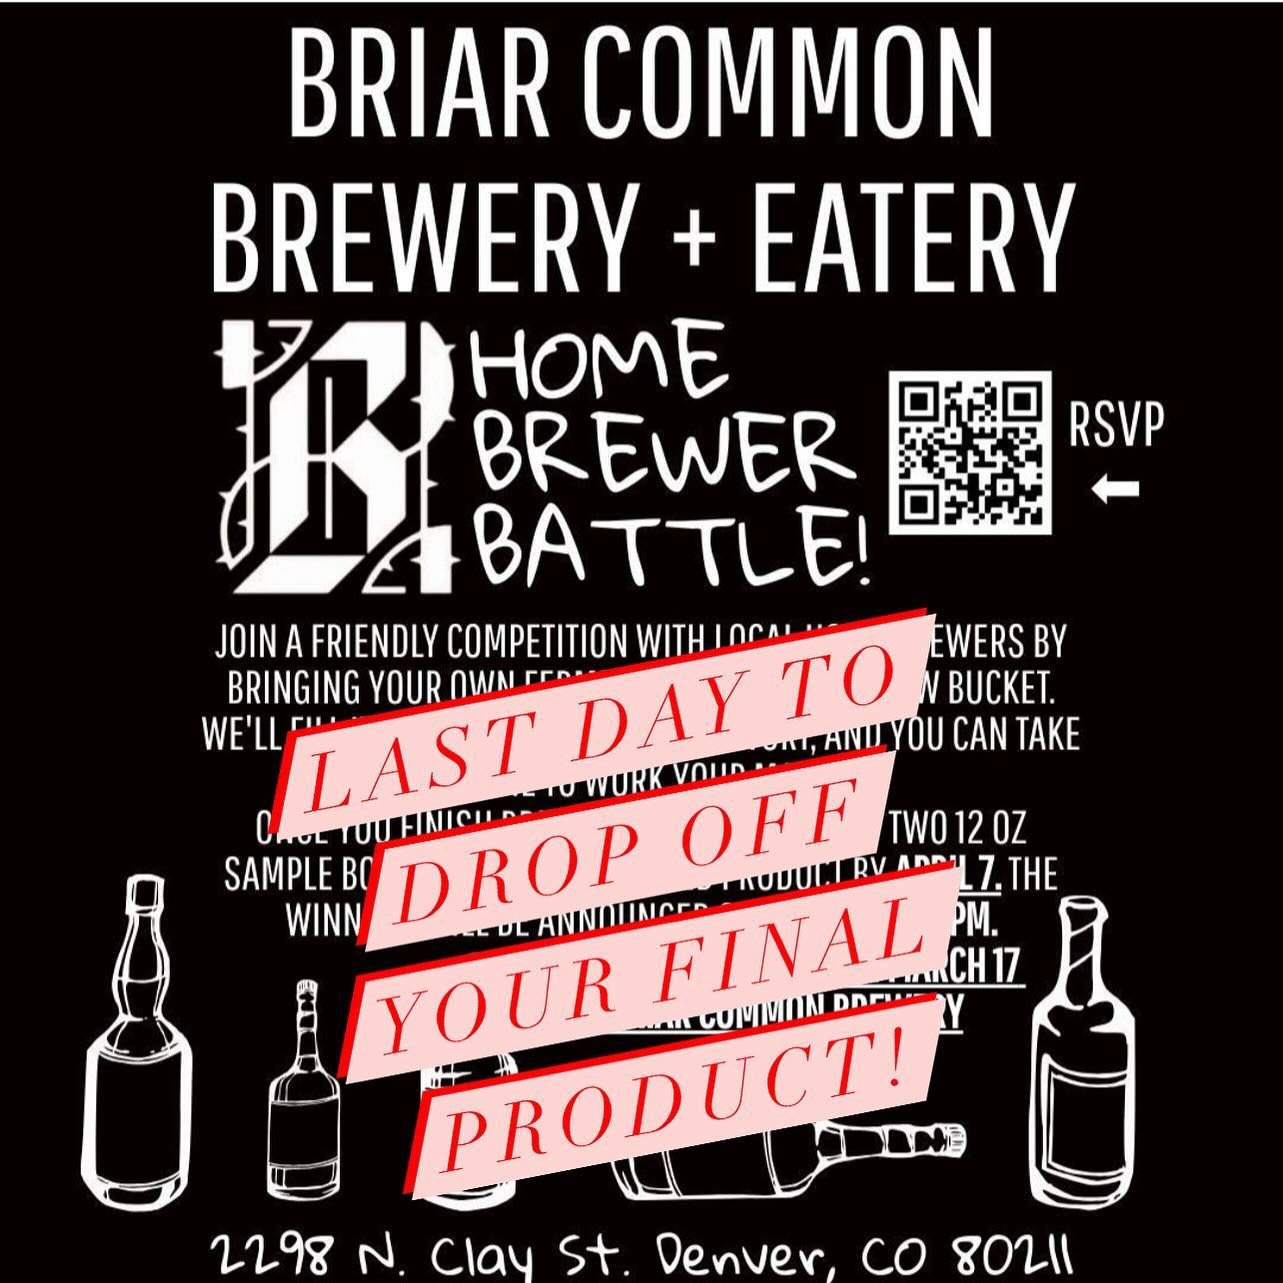 If you participated in the BRIAR COMMON Home Brewer Battle, make sure to drop off your final product. The winners will be announced on Wednesday, April 10th.
.
.
#notyouraveragebrewery #briarbrewerbattle #homebrewerbattle #nyab